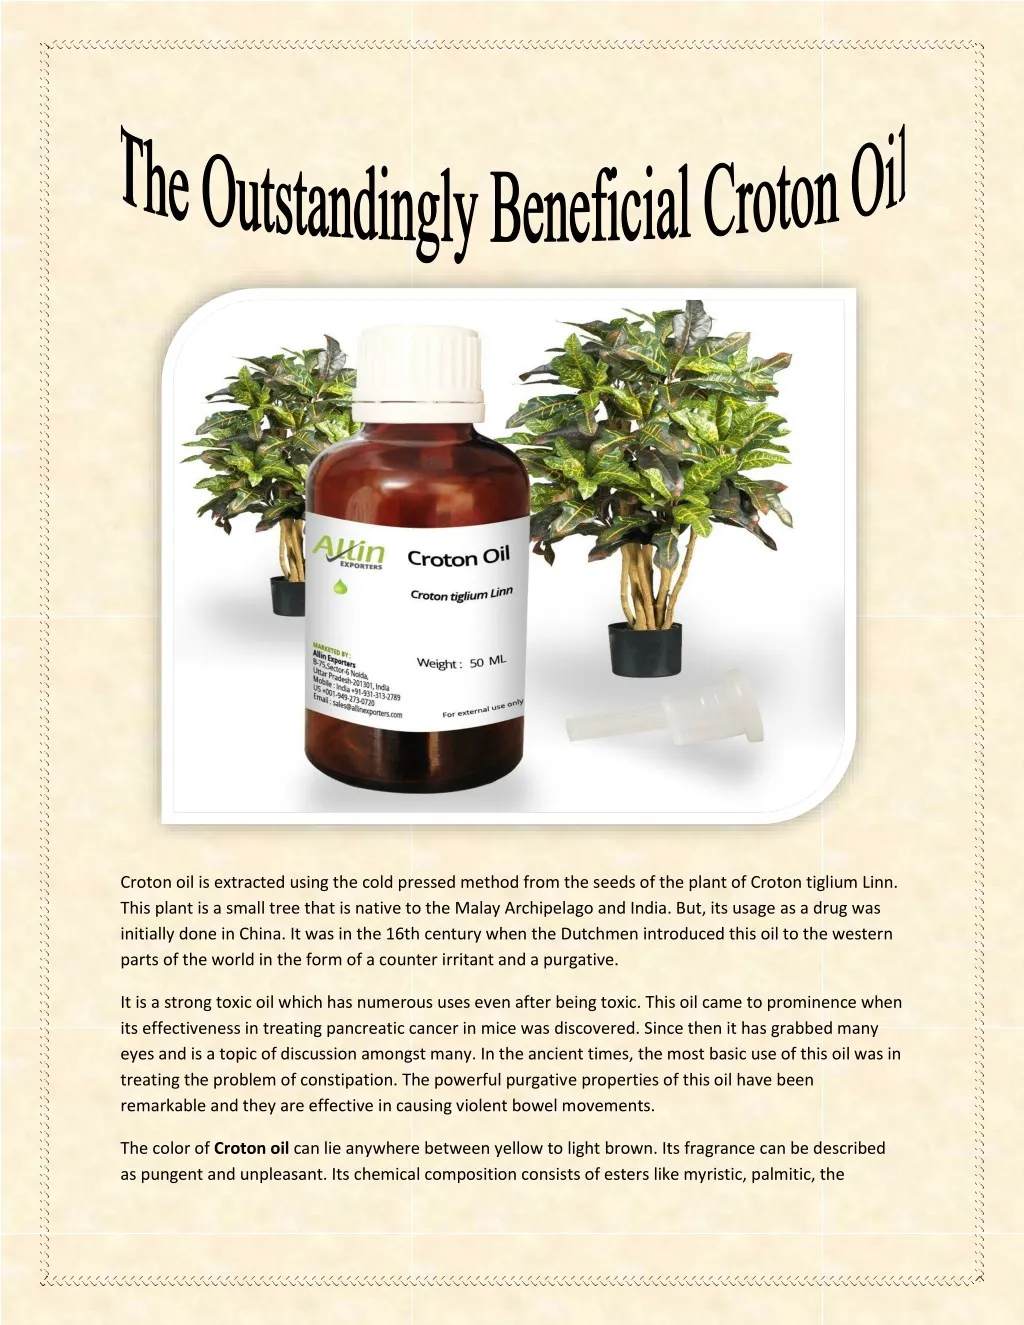 croton oil is extracted using the cold pressed